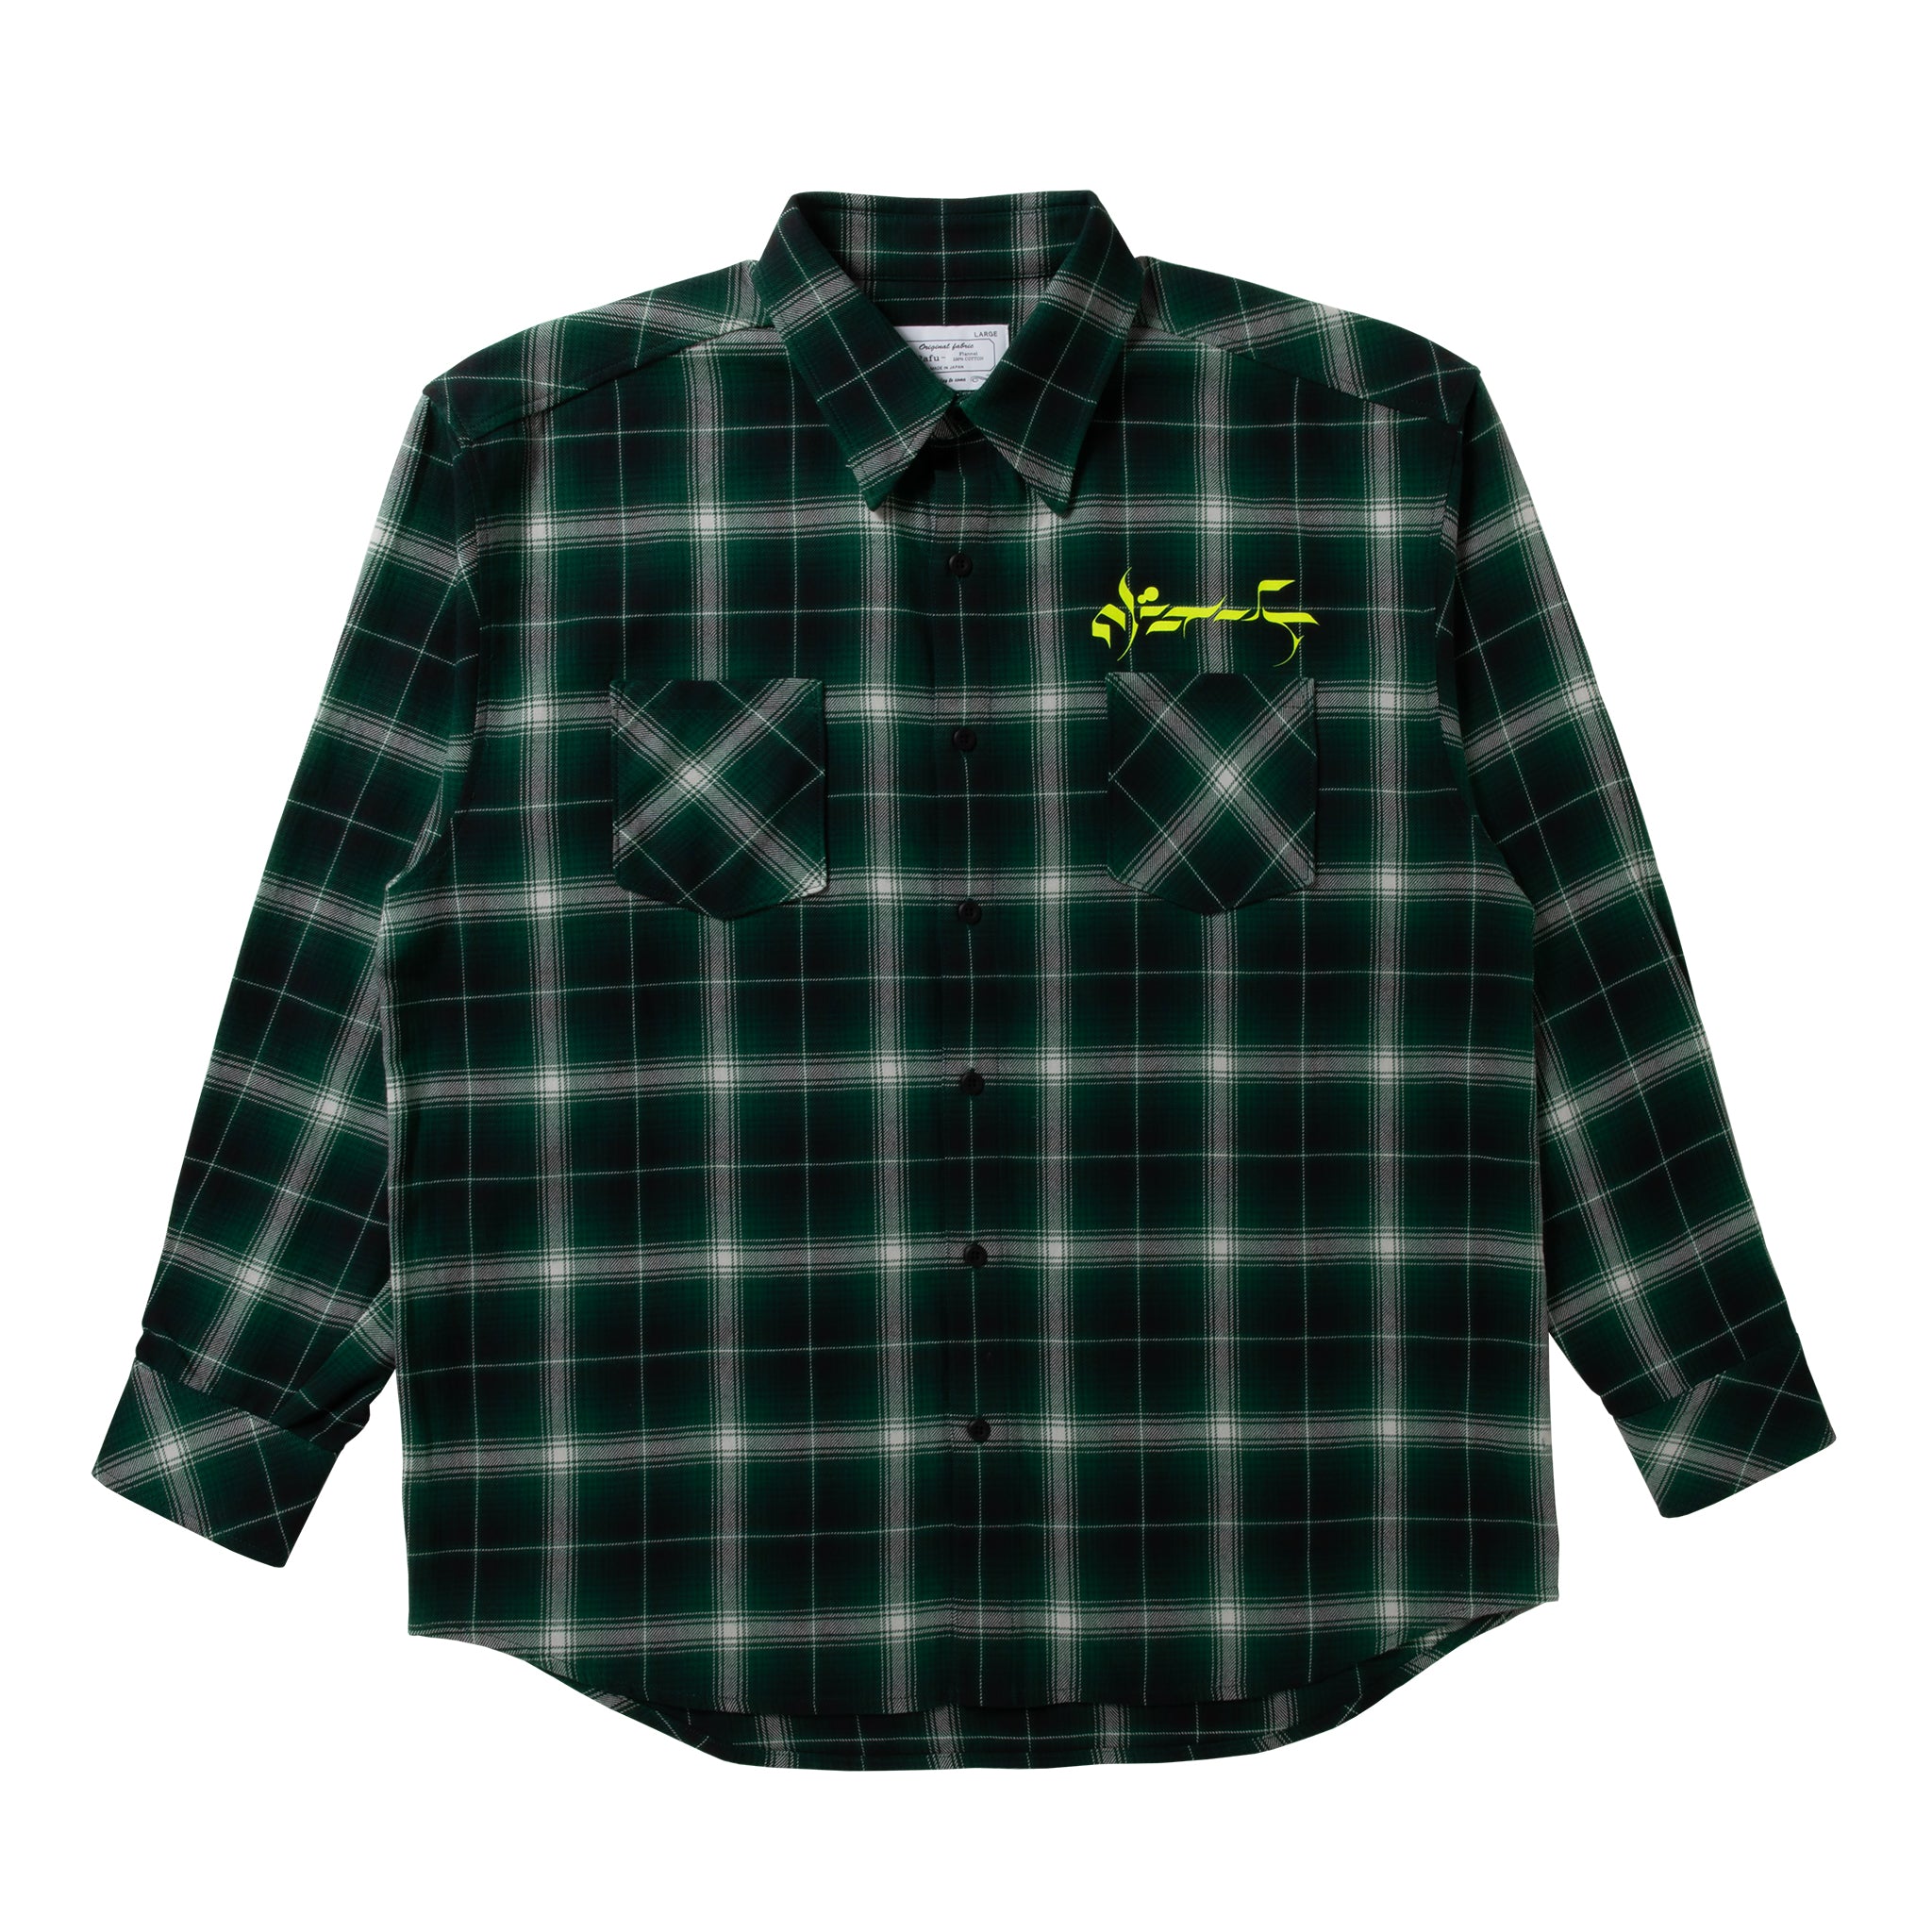 loosejoints≒RAFU - GUCCIMAZE - 'Joints' Fluo printed Flannel shirt (Green)